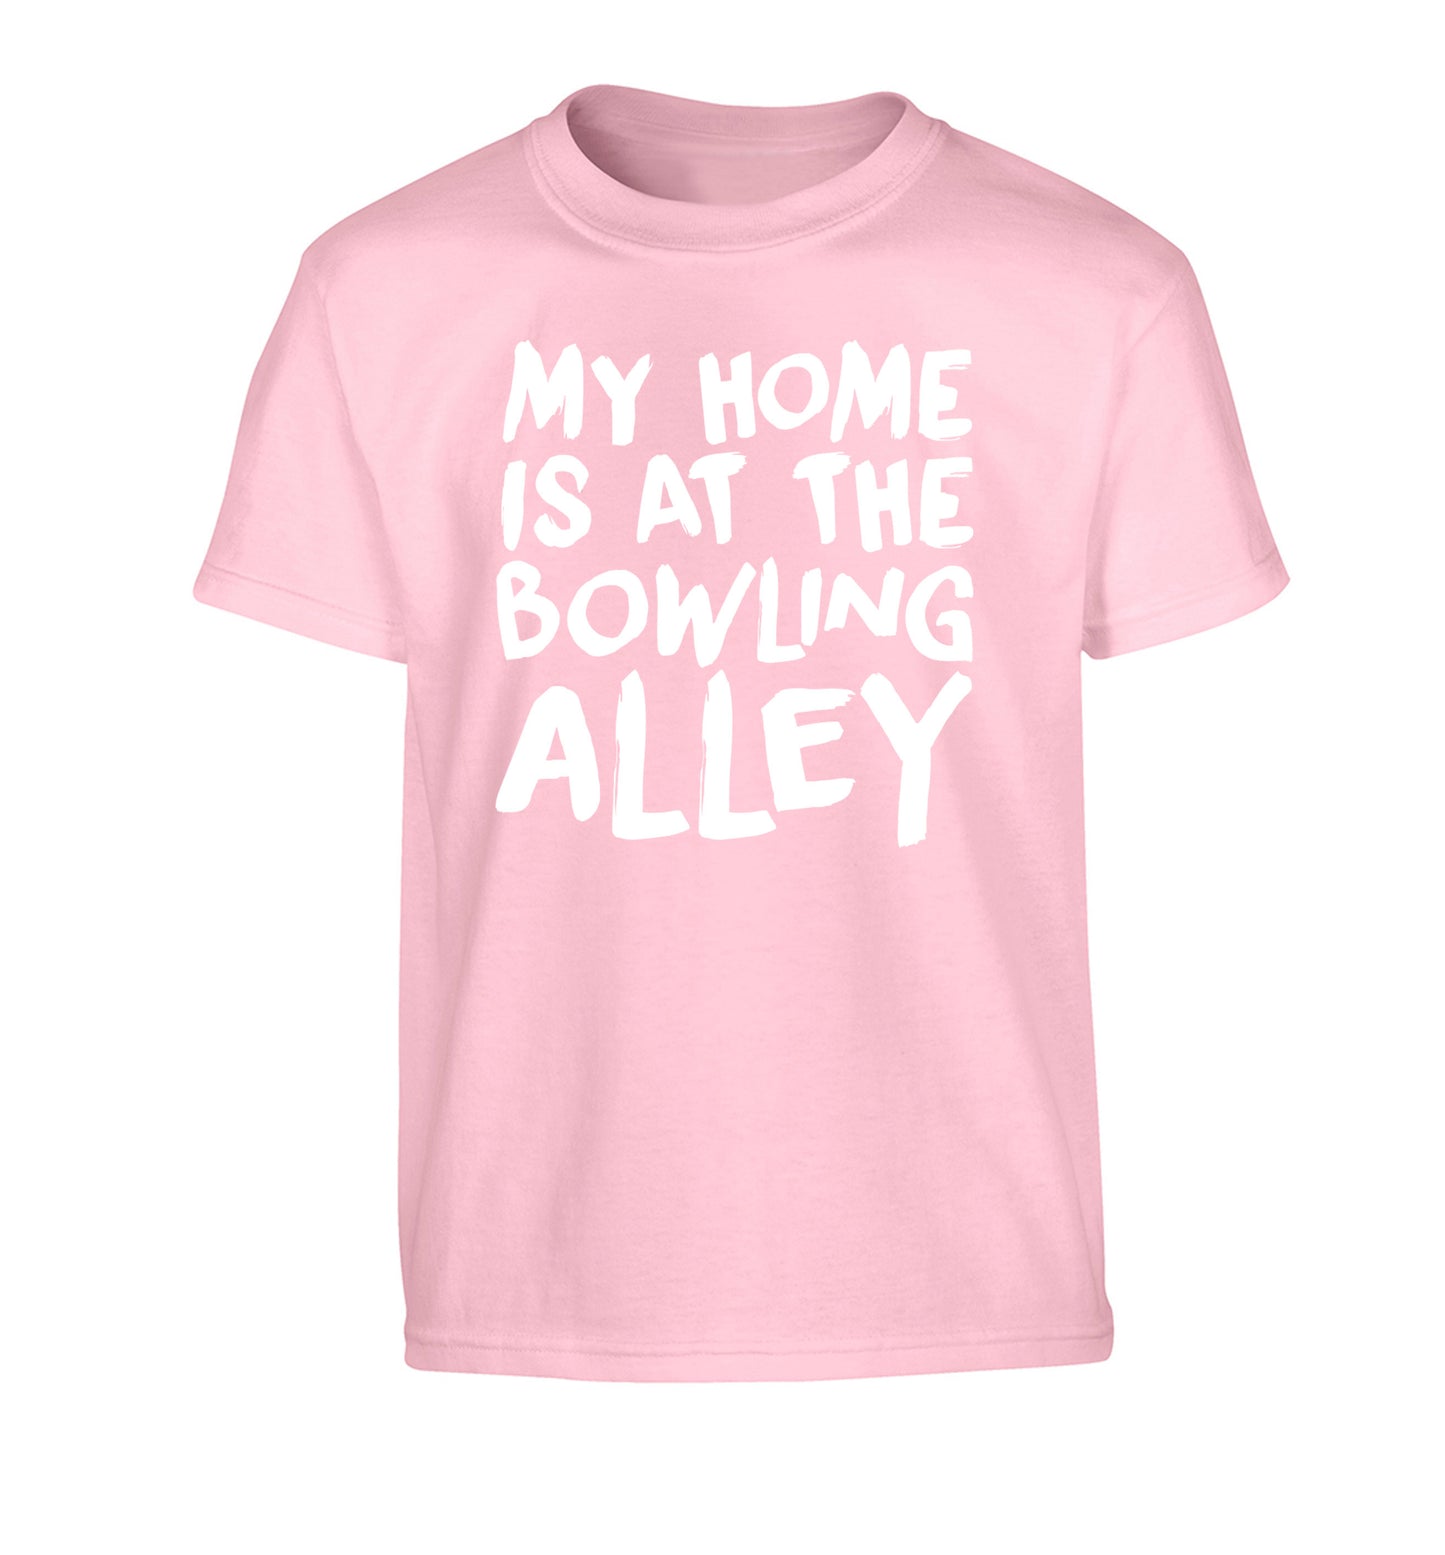 My home is at the bowling alley Children's light pink Tshirt 12-14 Years